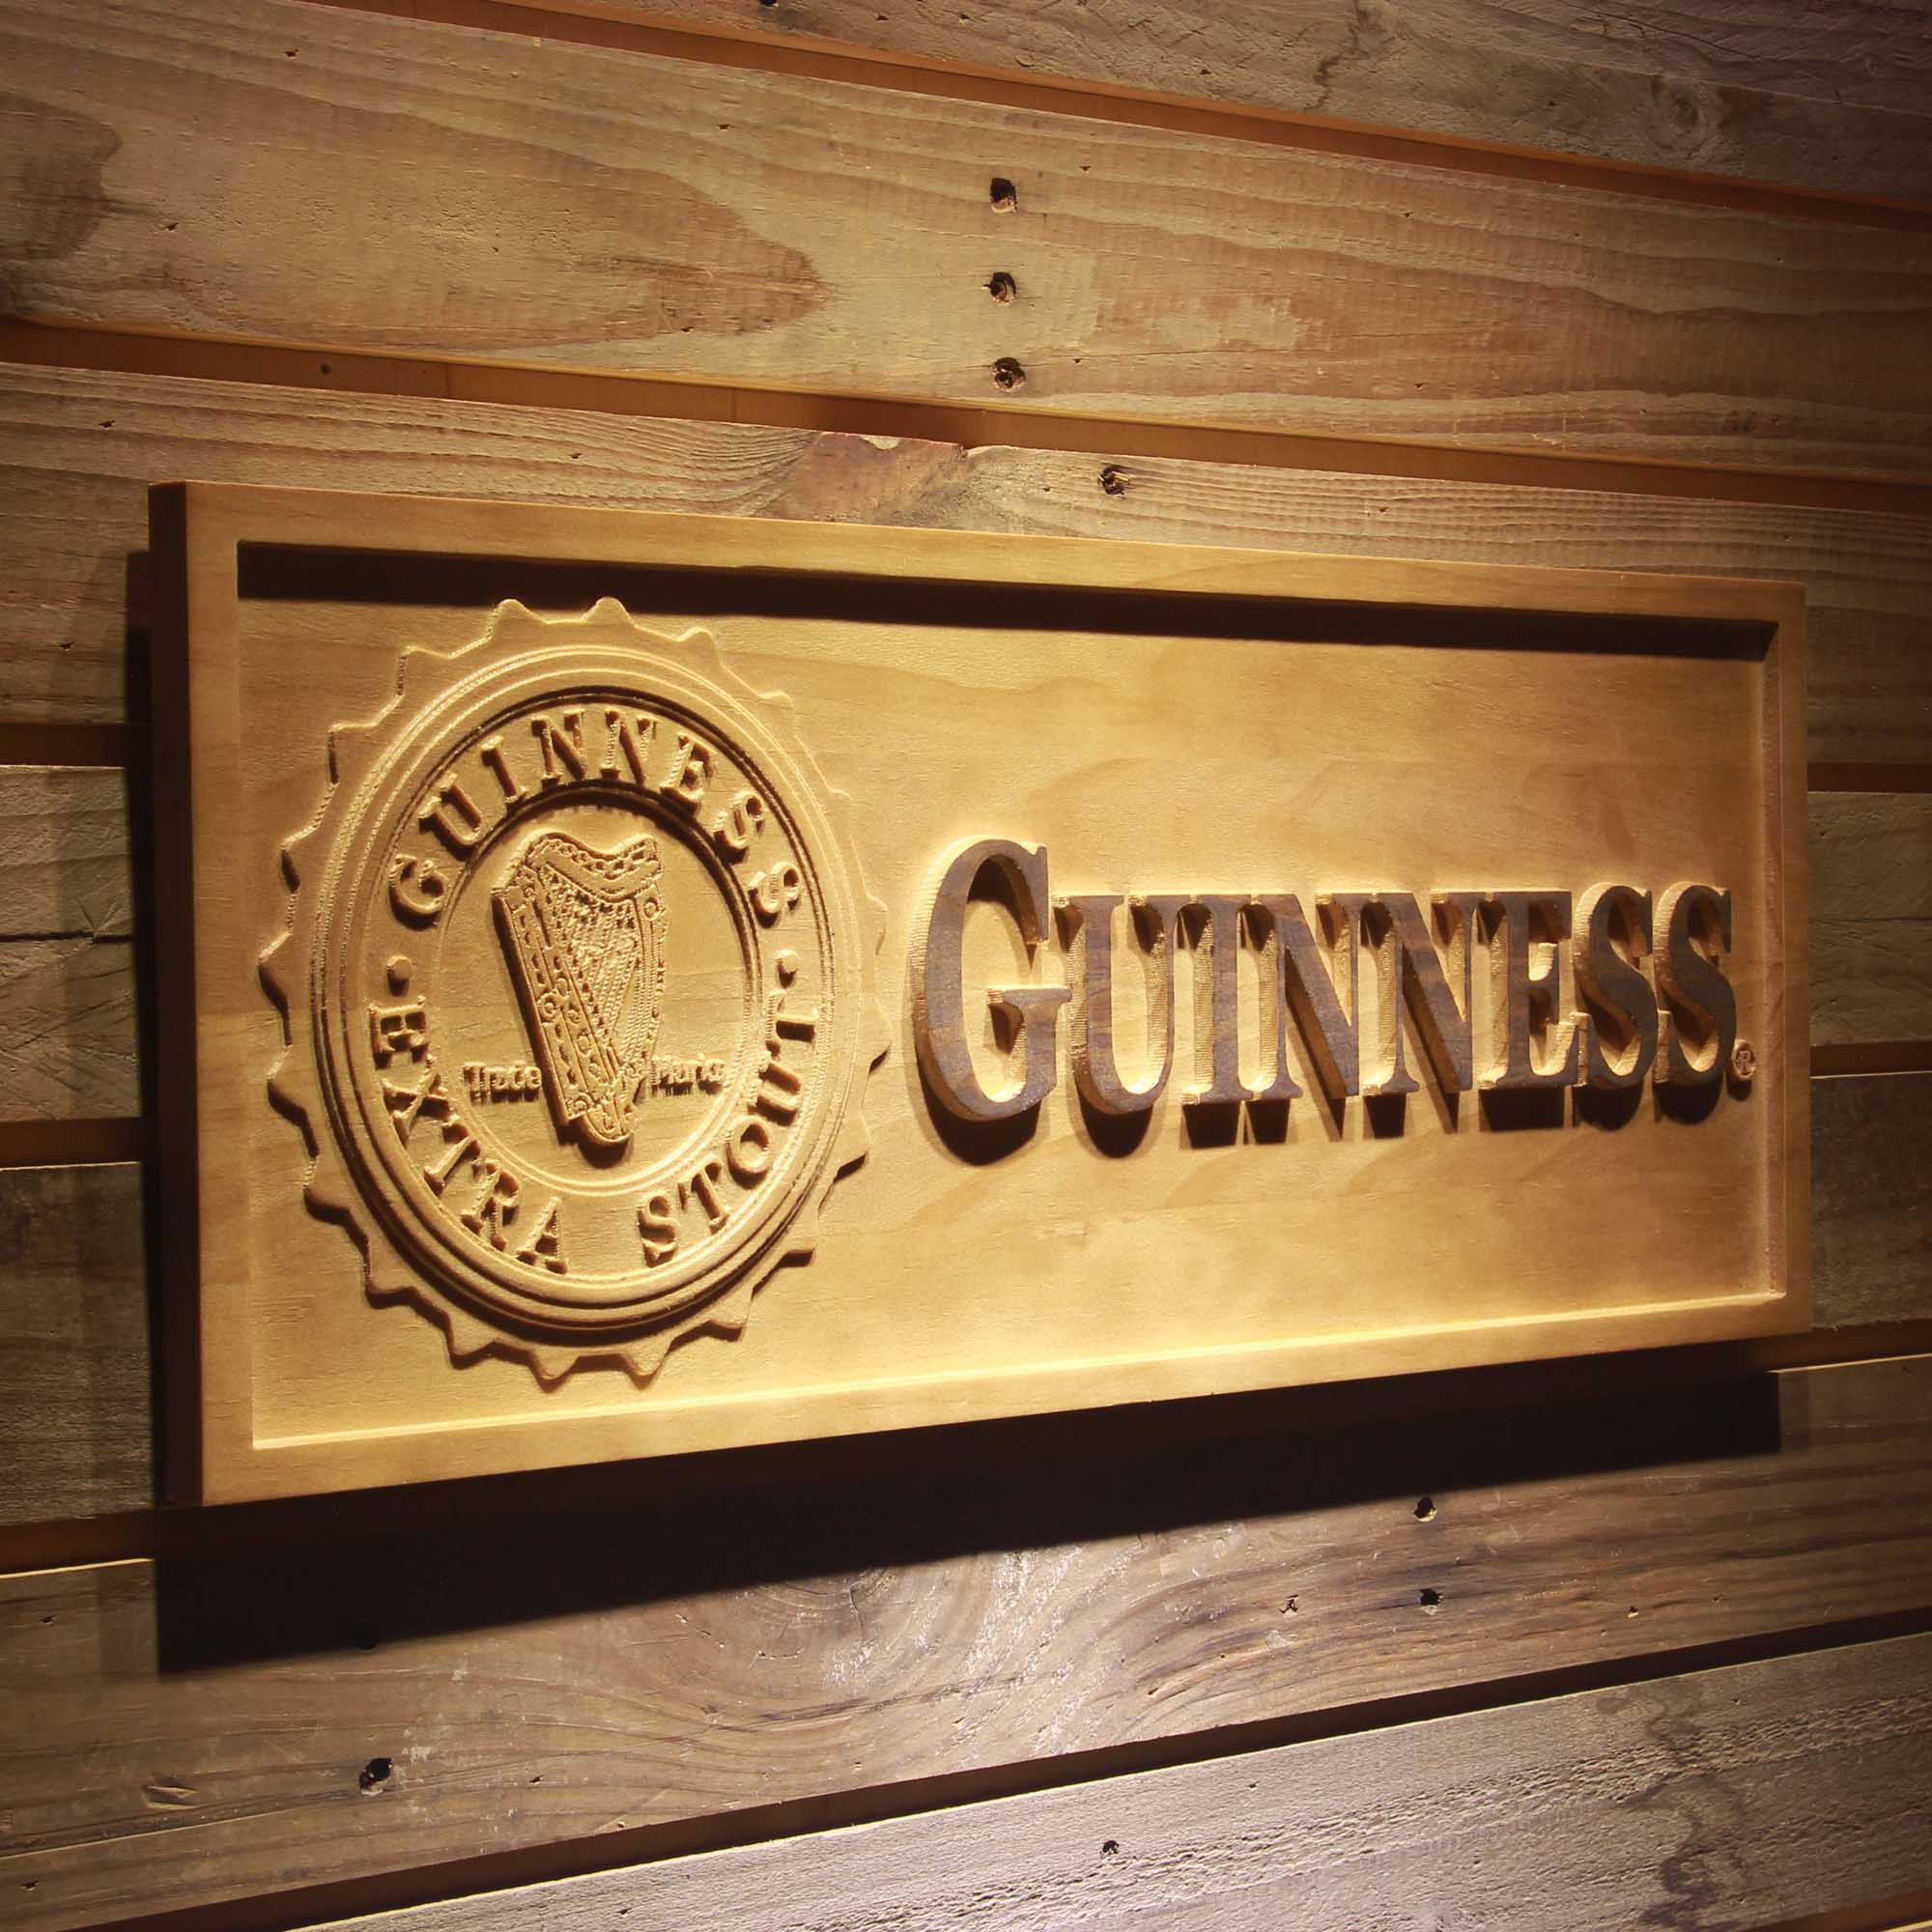 Guinness Extra Stout 3D Wooden Engrave Sign